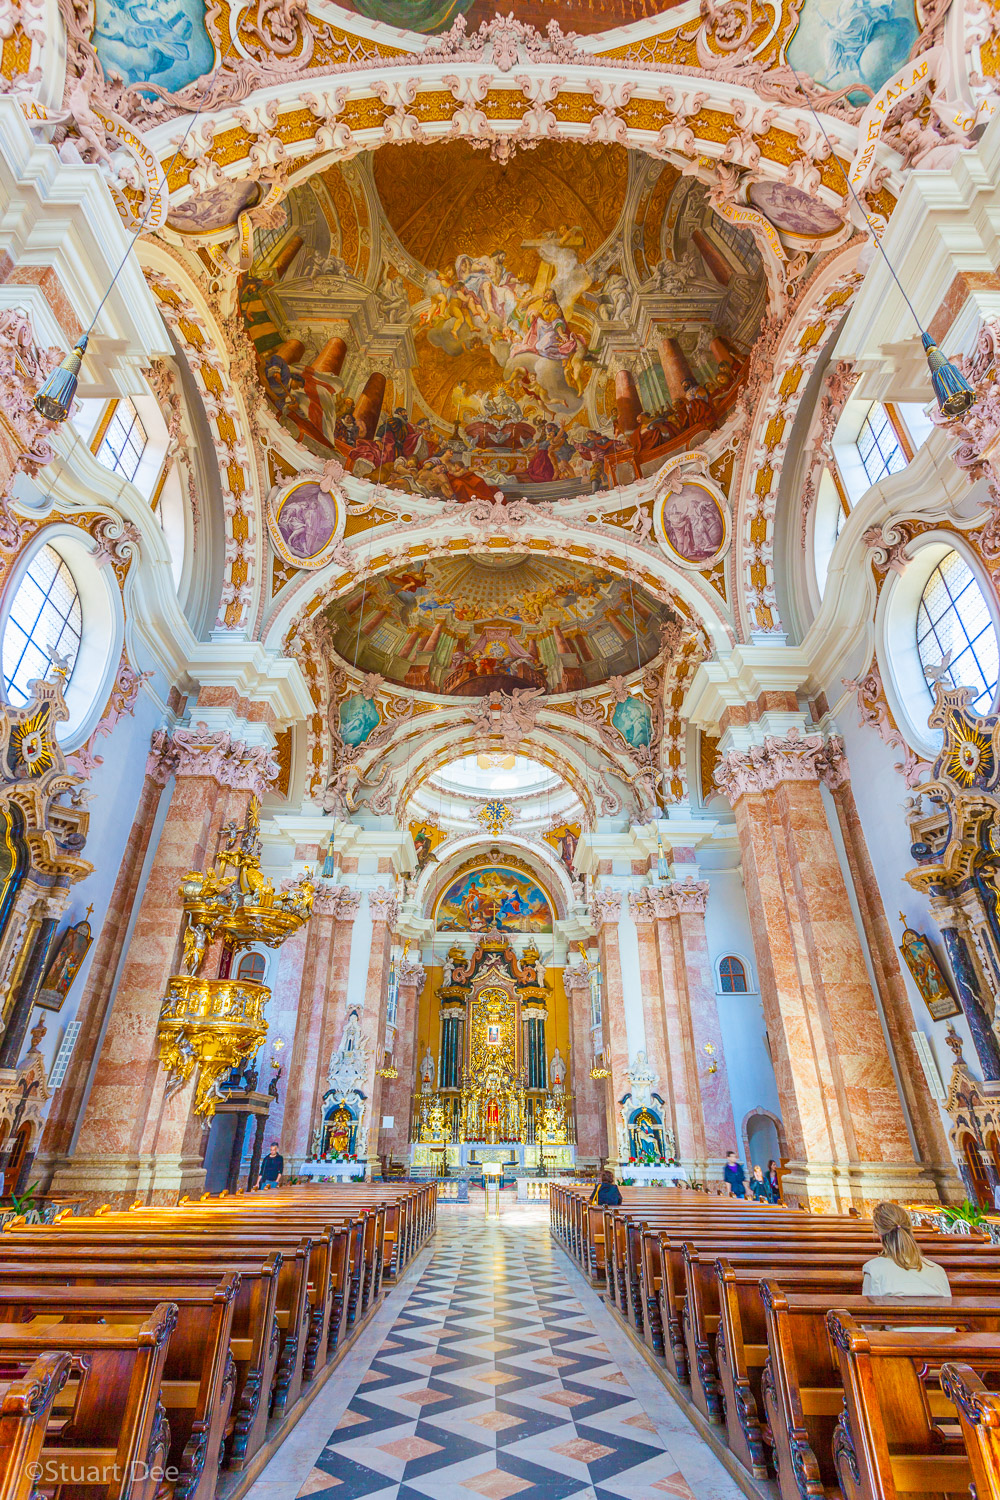  Interior, Innsbruck Cathedral, Innsbruck, Austria. Also known as the Domkirche, St. Jakob Cathedral, and Cathedral of St. James, it is one of the most important in the city. It is built in the 18th century Baroque style. 